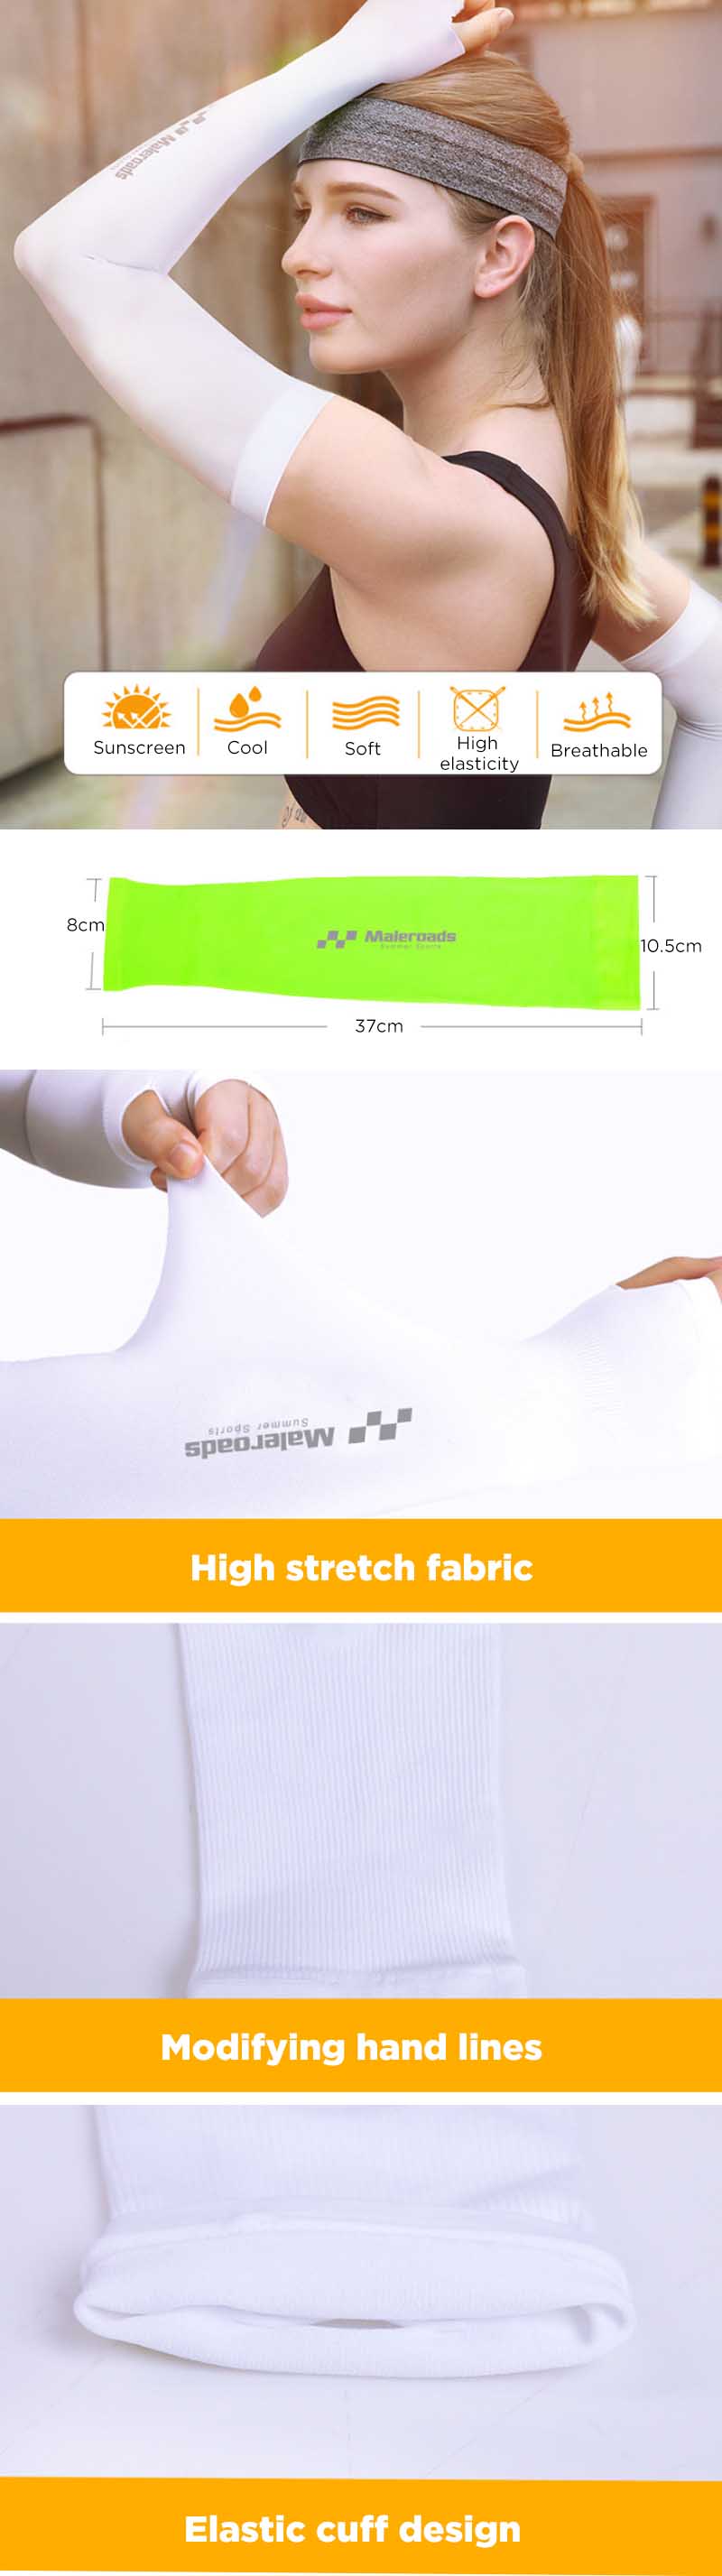 KALOAD-1-Pair-Ice-Sleeve-Breathable-Anti-mosquito-Sunscreen-Arm-Sleeves-Sports-Cycling-Running-Fitne-1507217-1